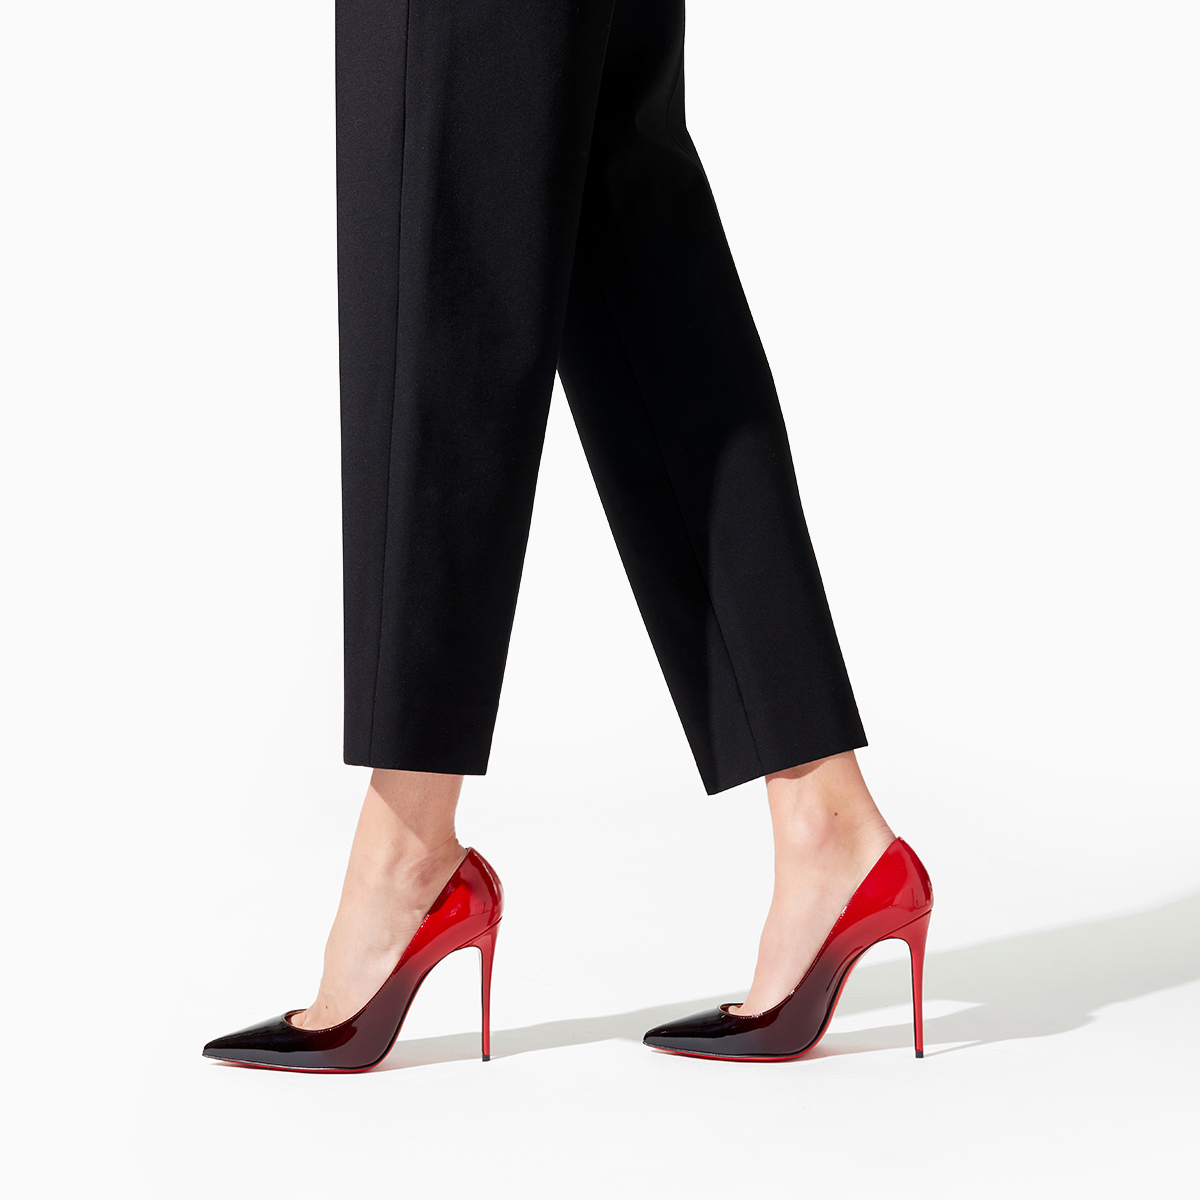 The red bottom WASNT supposed to be RED!! 🤯 Famous for its striking c, christian louboutin